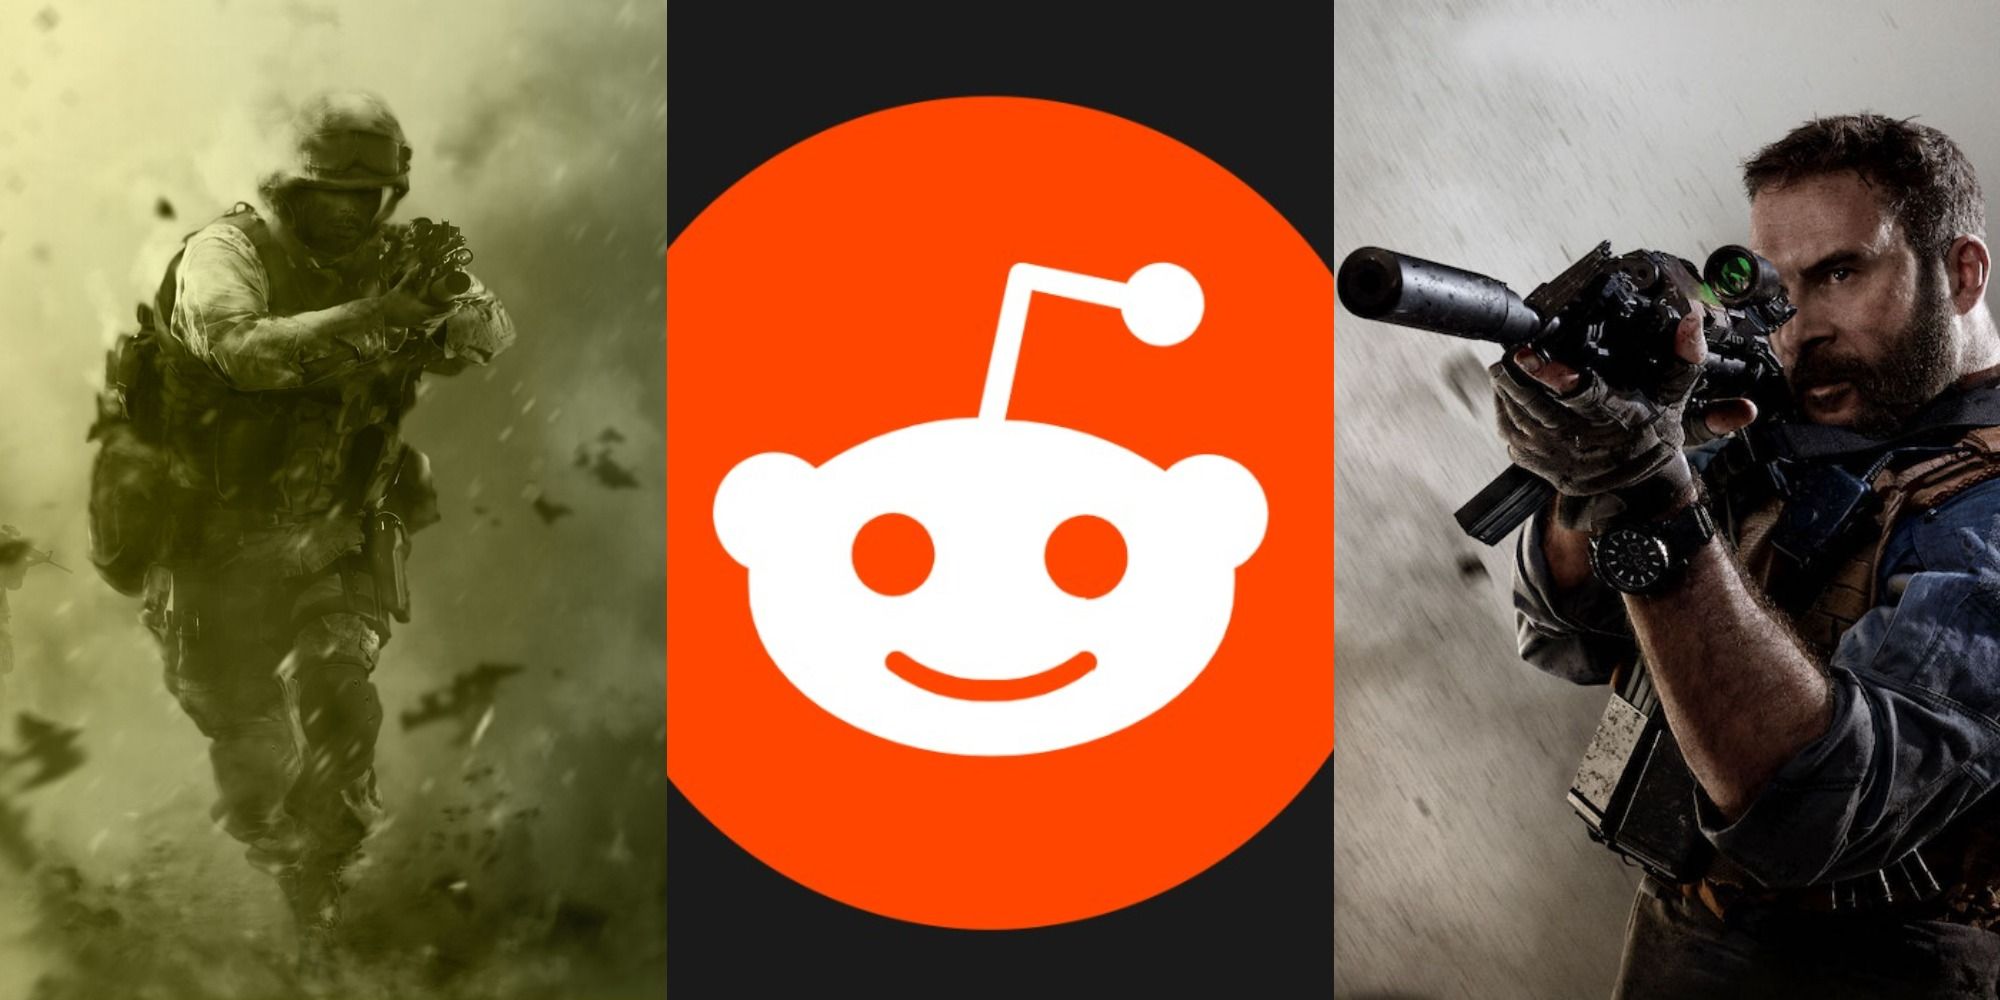 Split Image of two Call of Duty soldiers and the Reddit logo